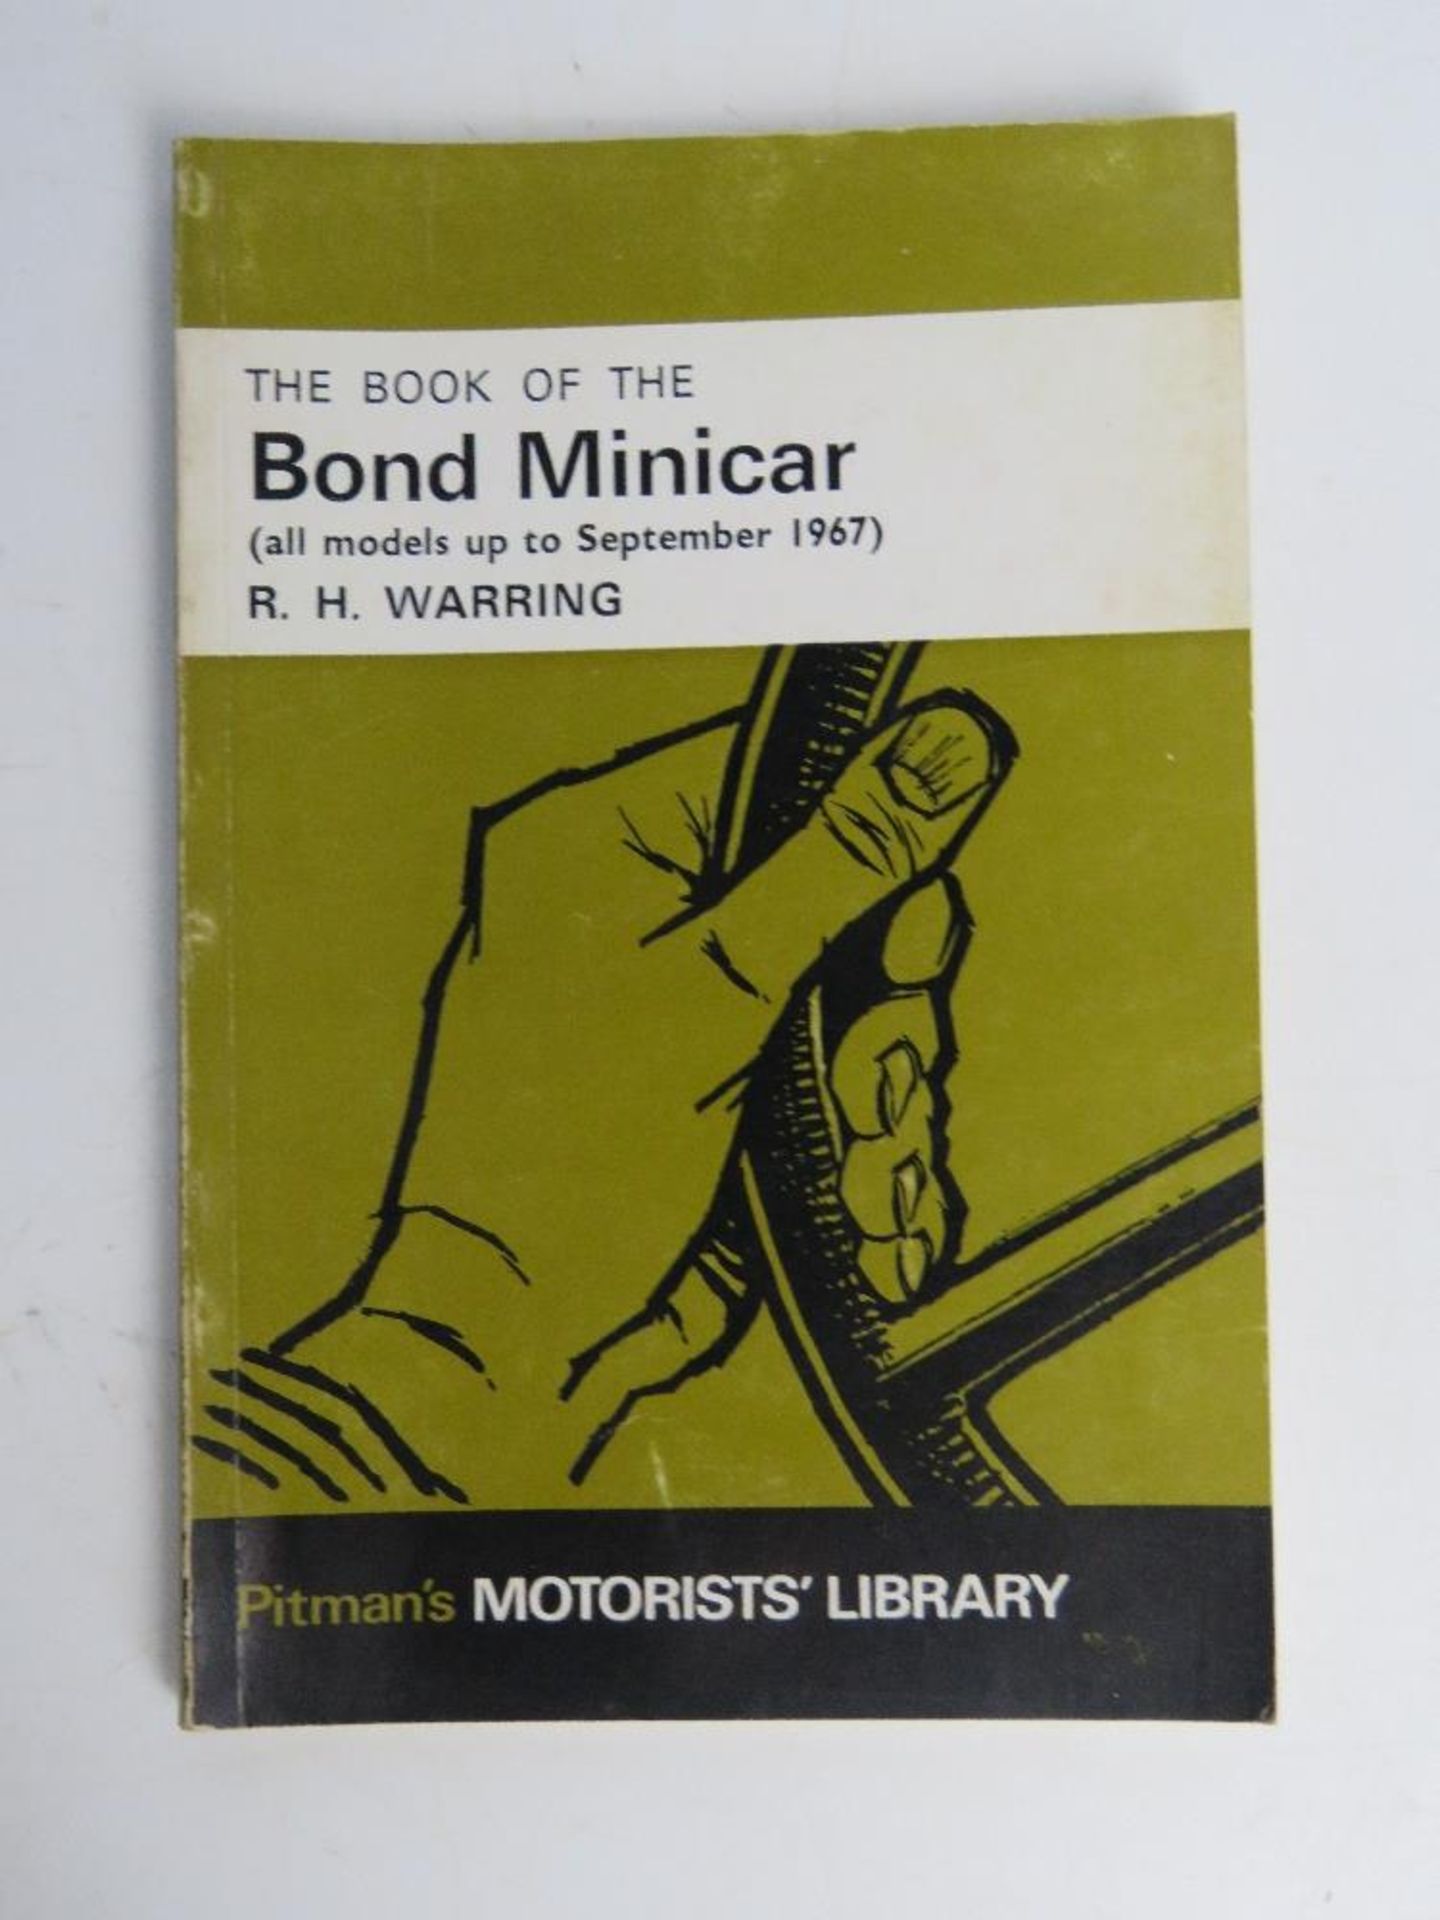 The Book of the Bond minicar by R.H. Warring, Pitman's Motorists Library, third edition 1968.